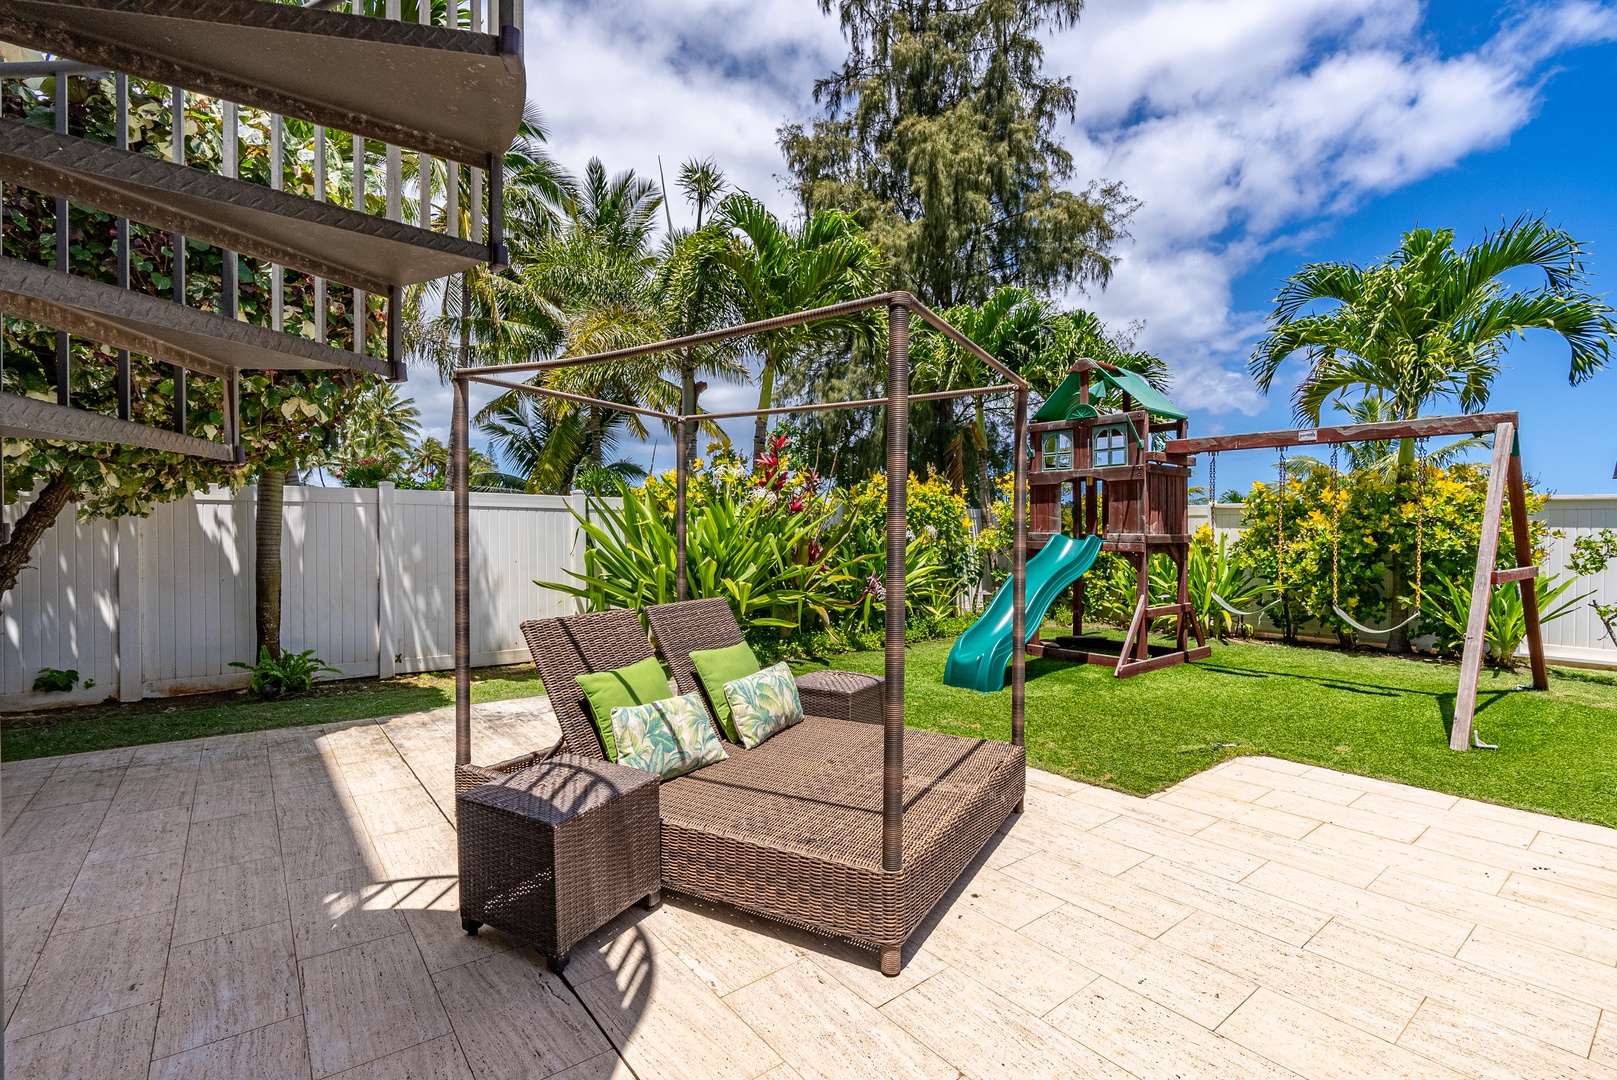 Waialua Vacation Rentals, Kala'iku Estate - Relax in the sun while the kids play on the play structure!